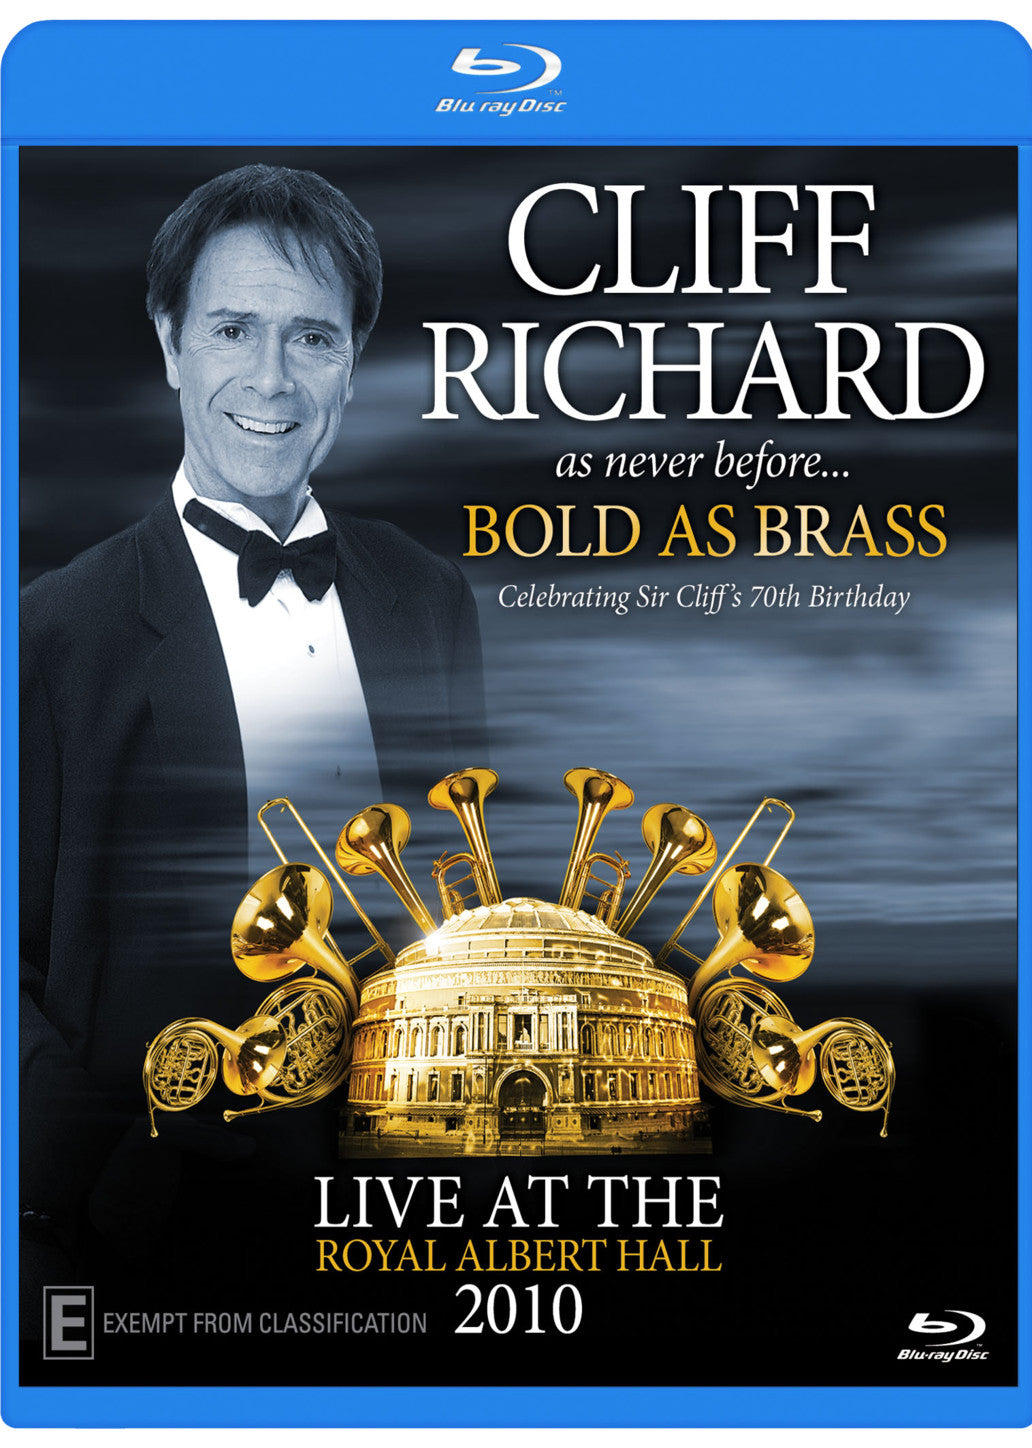 CLIFF RICHARD BOLD AS BRASS LIVE IN LONDON 2010 (BLU RAY)